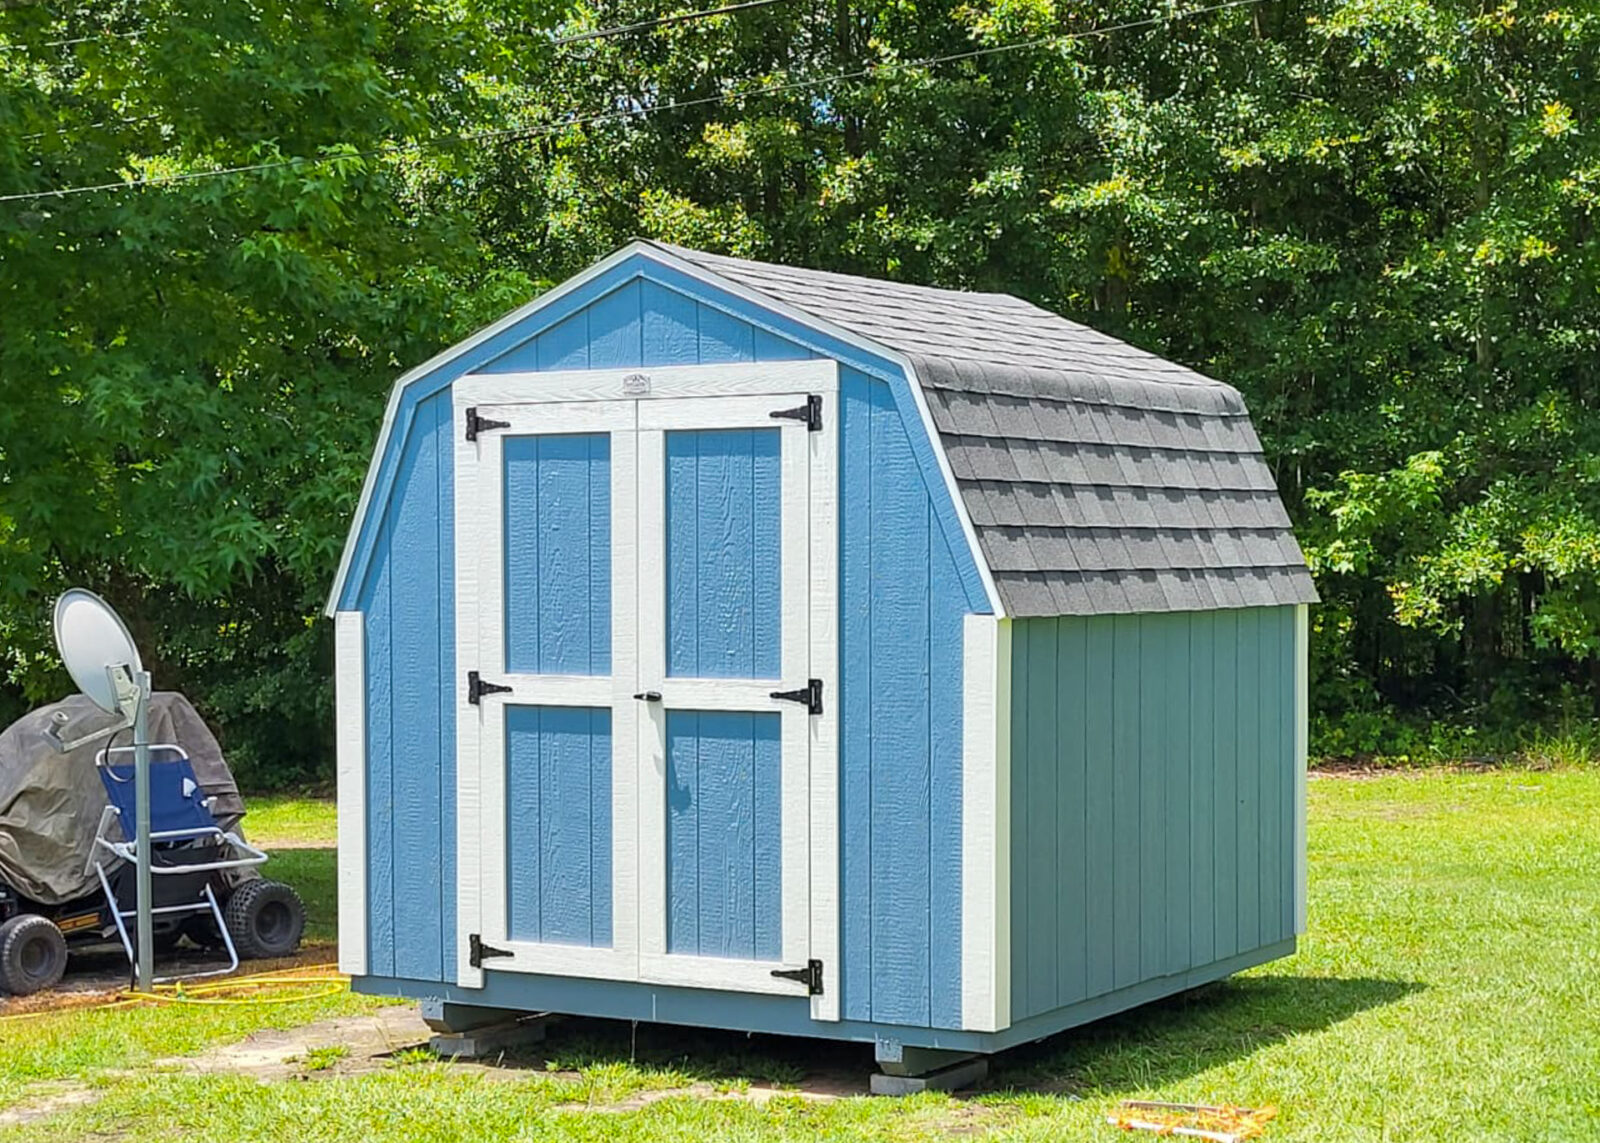 exterior of a blue minibarn rent to own sheds for sale